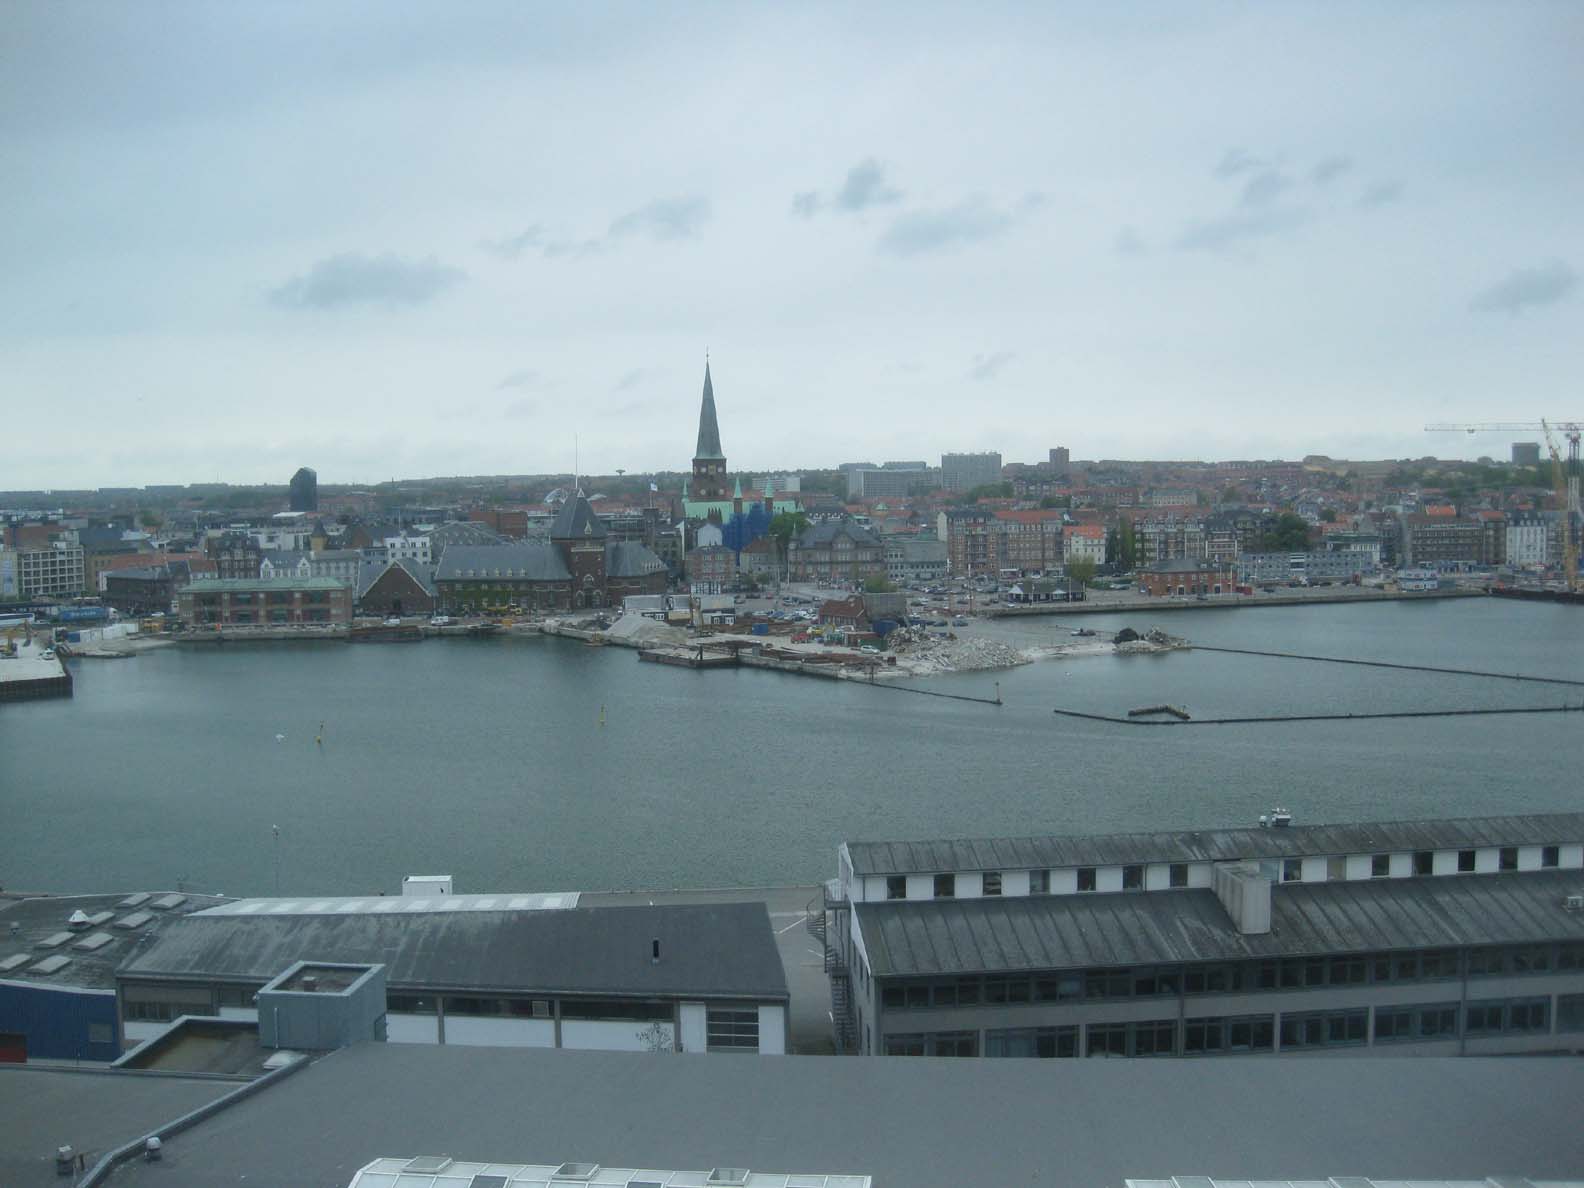 View of Aarhus from the ship